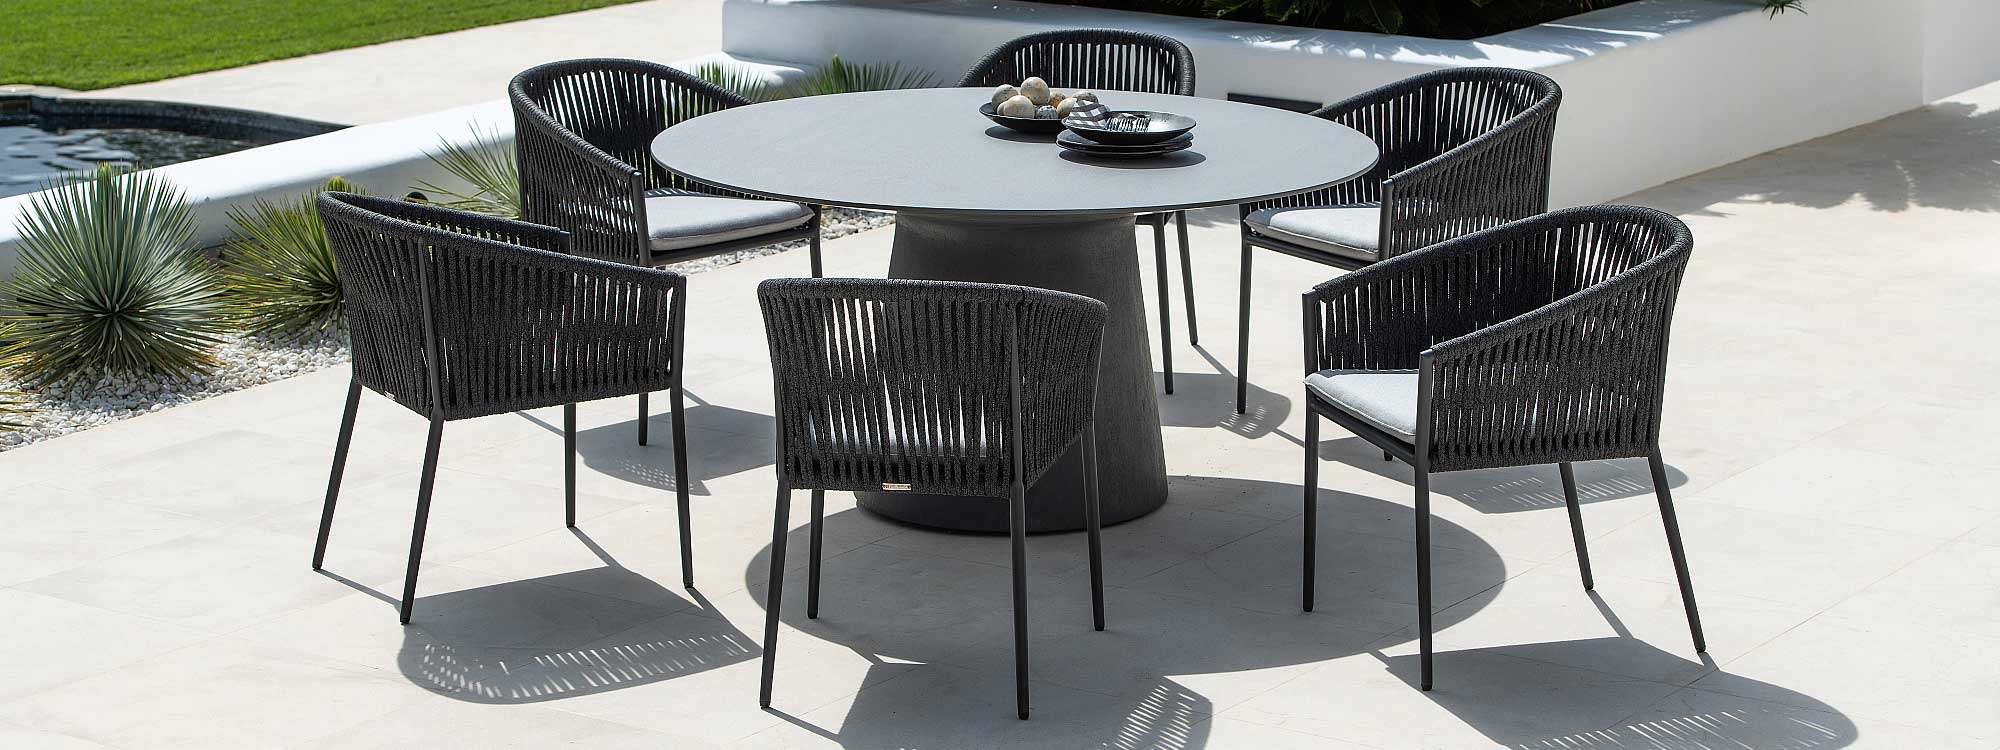 Image of Jati & Kebon Fortuna Rope charcoal black garden dining chairs around a chic circular garden table on a sunny terrace